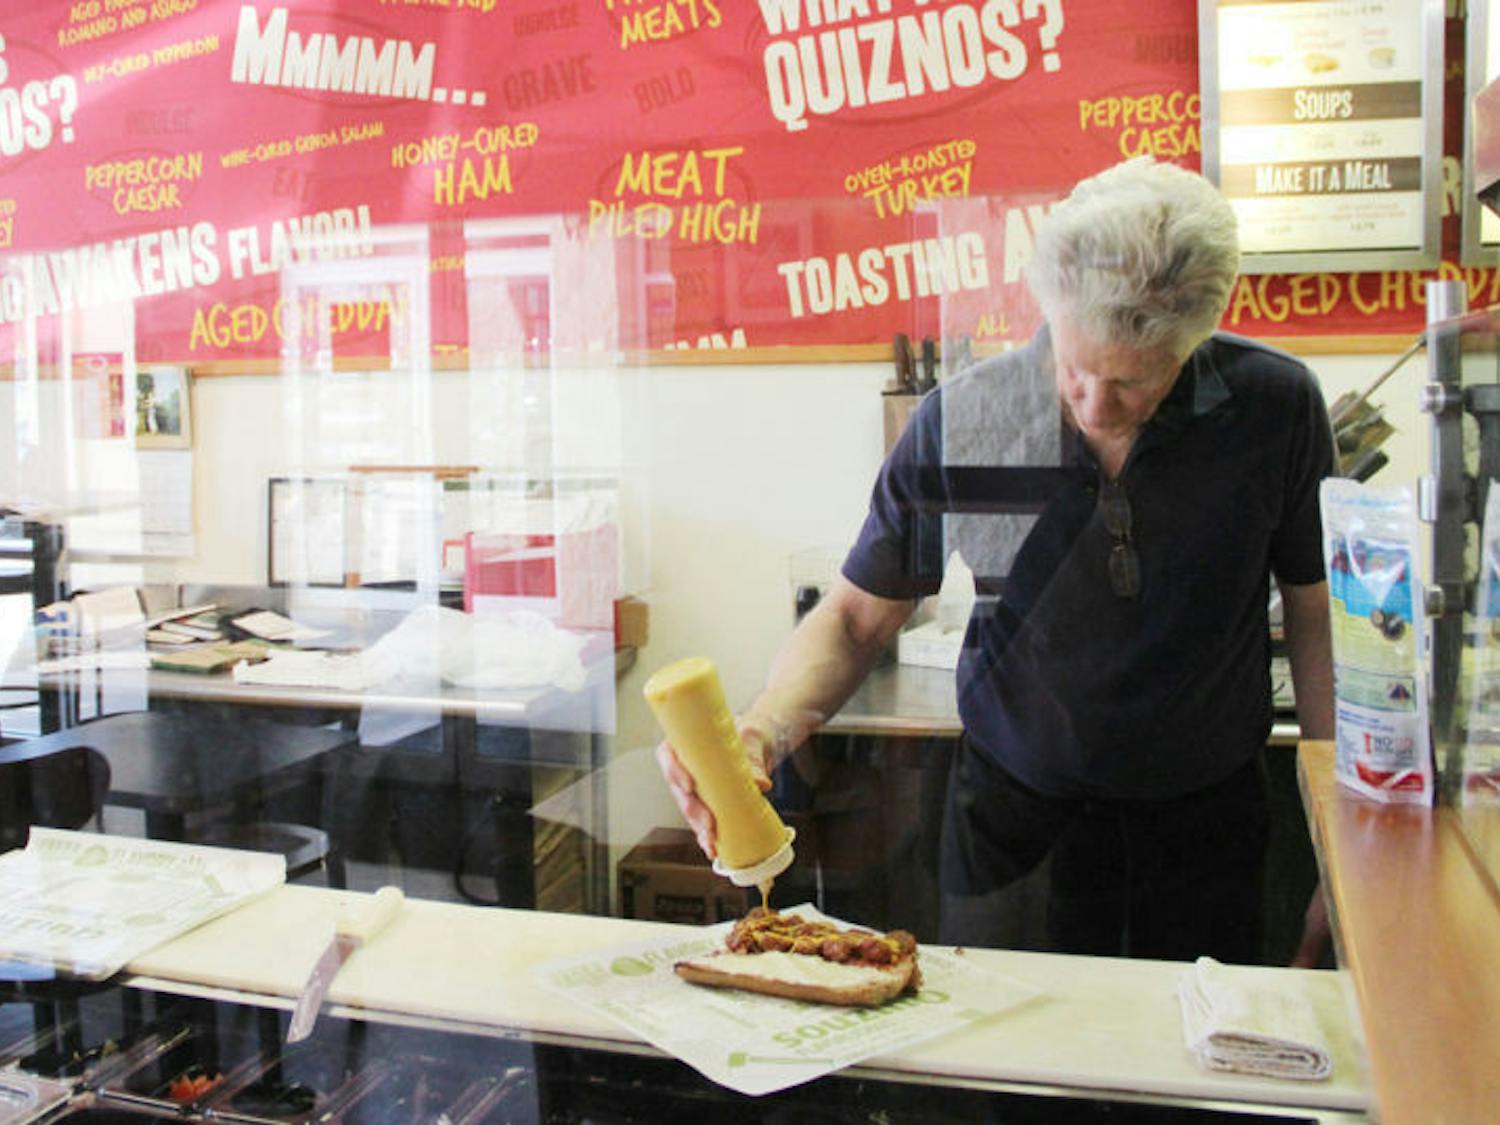 Lance O’Carroll, the owner of Gainesville’s last Quiznos, makes a sandwich for a customer. Located at 3545 SW 34th St., the store will be making its last sub Saturday after being open for 10 years.